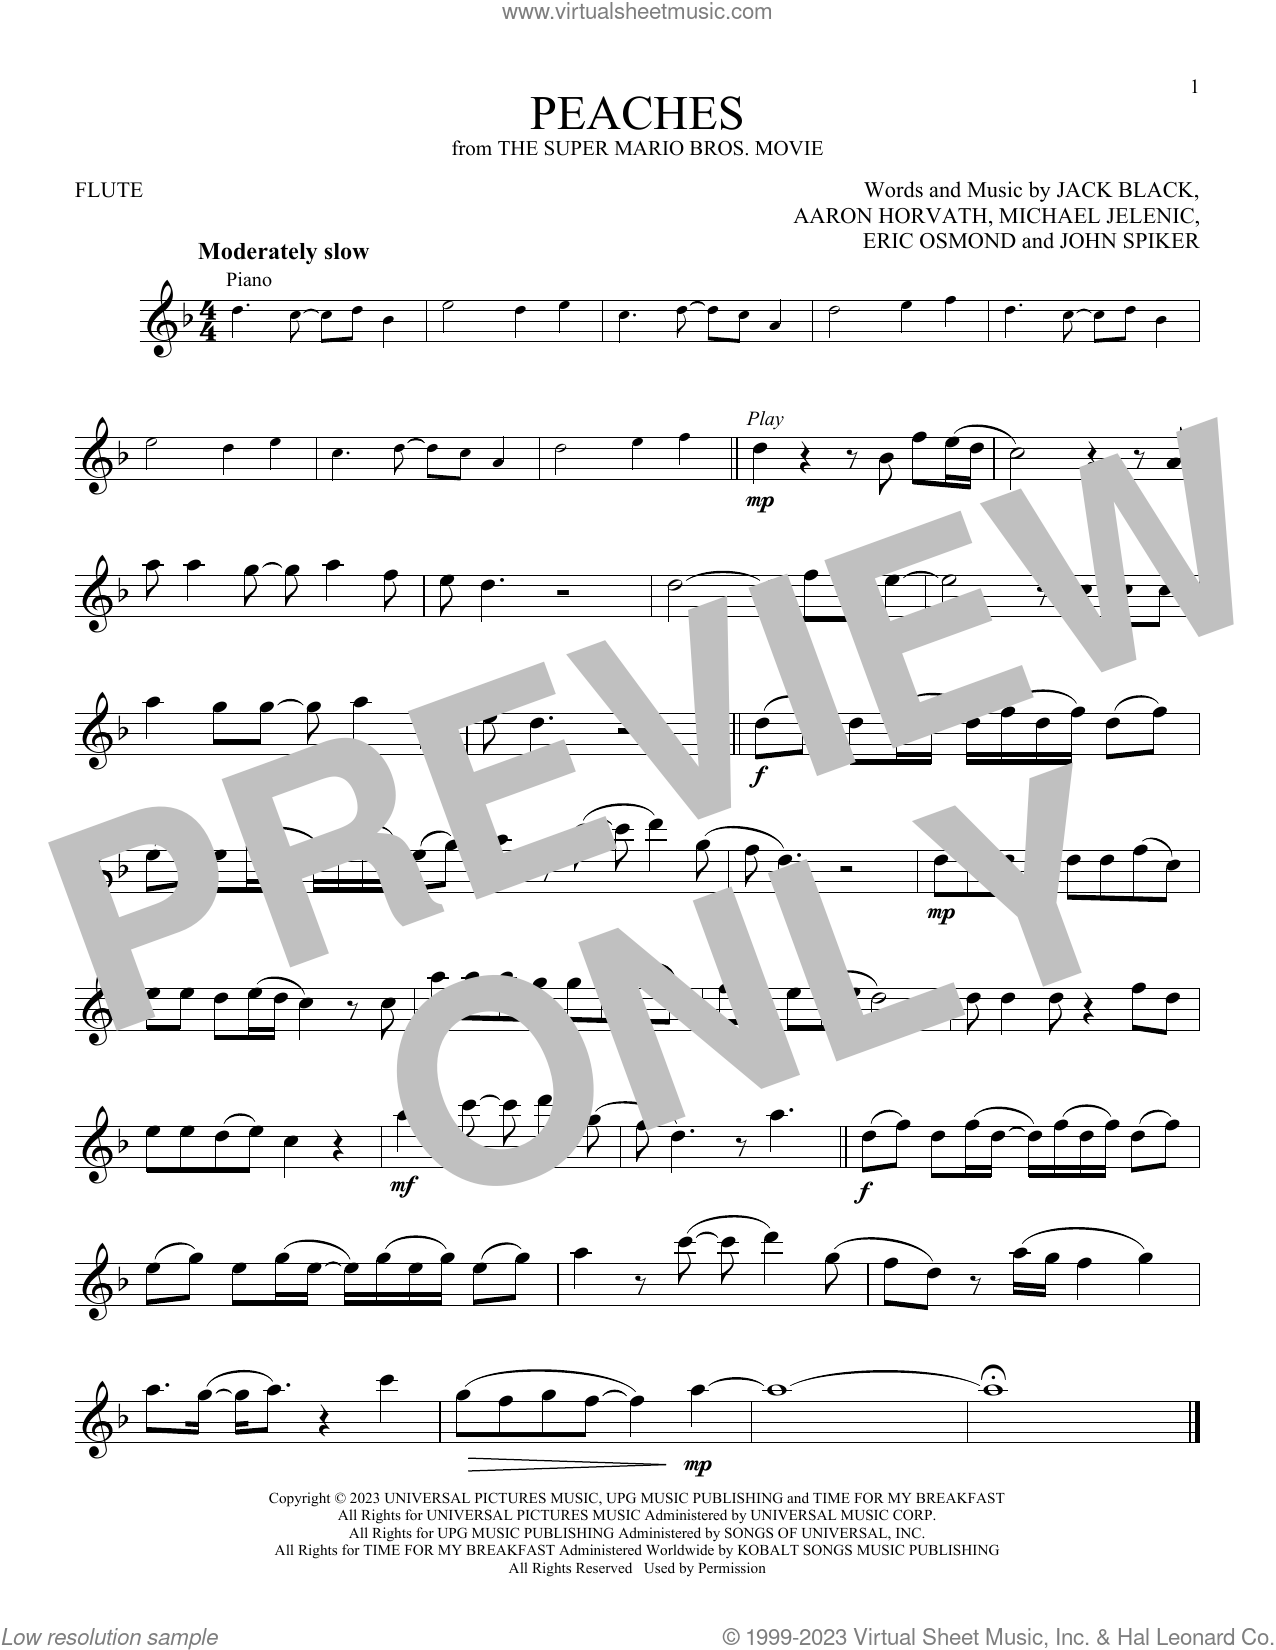 Peaches (from The Super Mario Bros. Movie) sheet music for flute solo